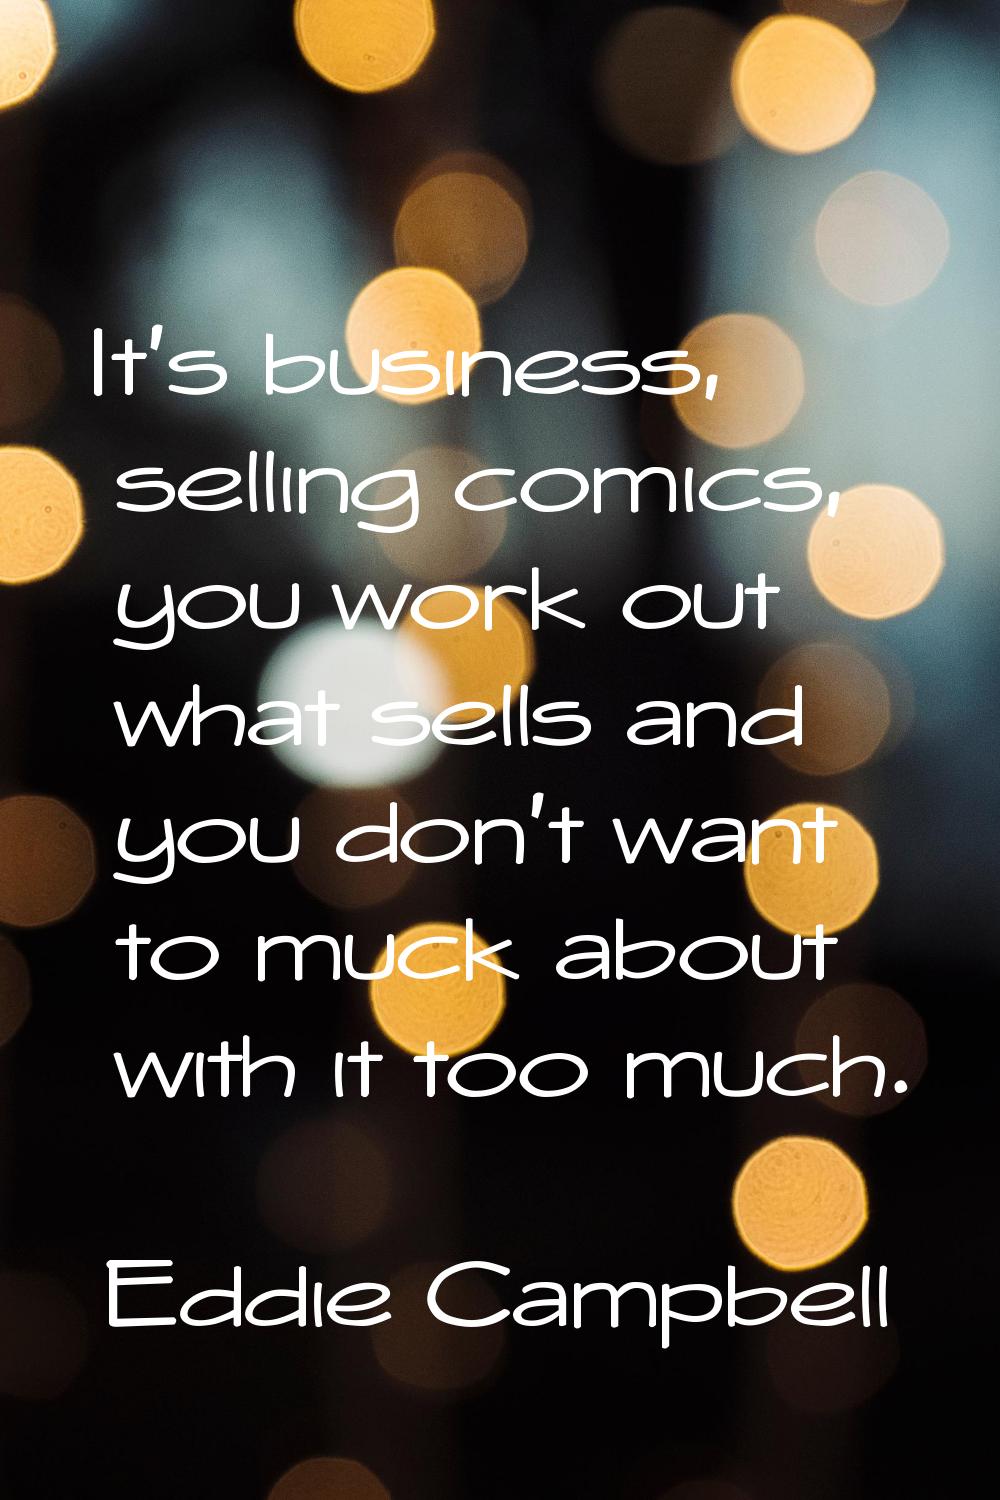 It's business, selling comics, you work out what sells and you don't want to muck about with it too